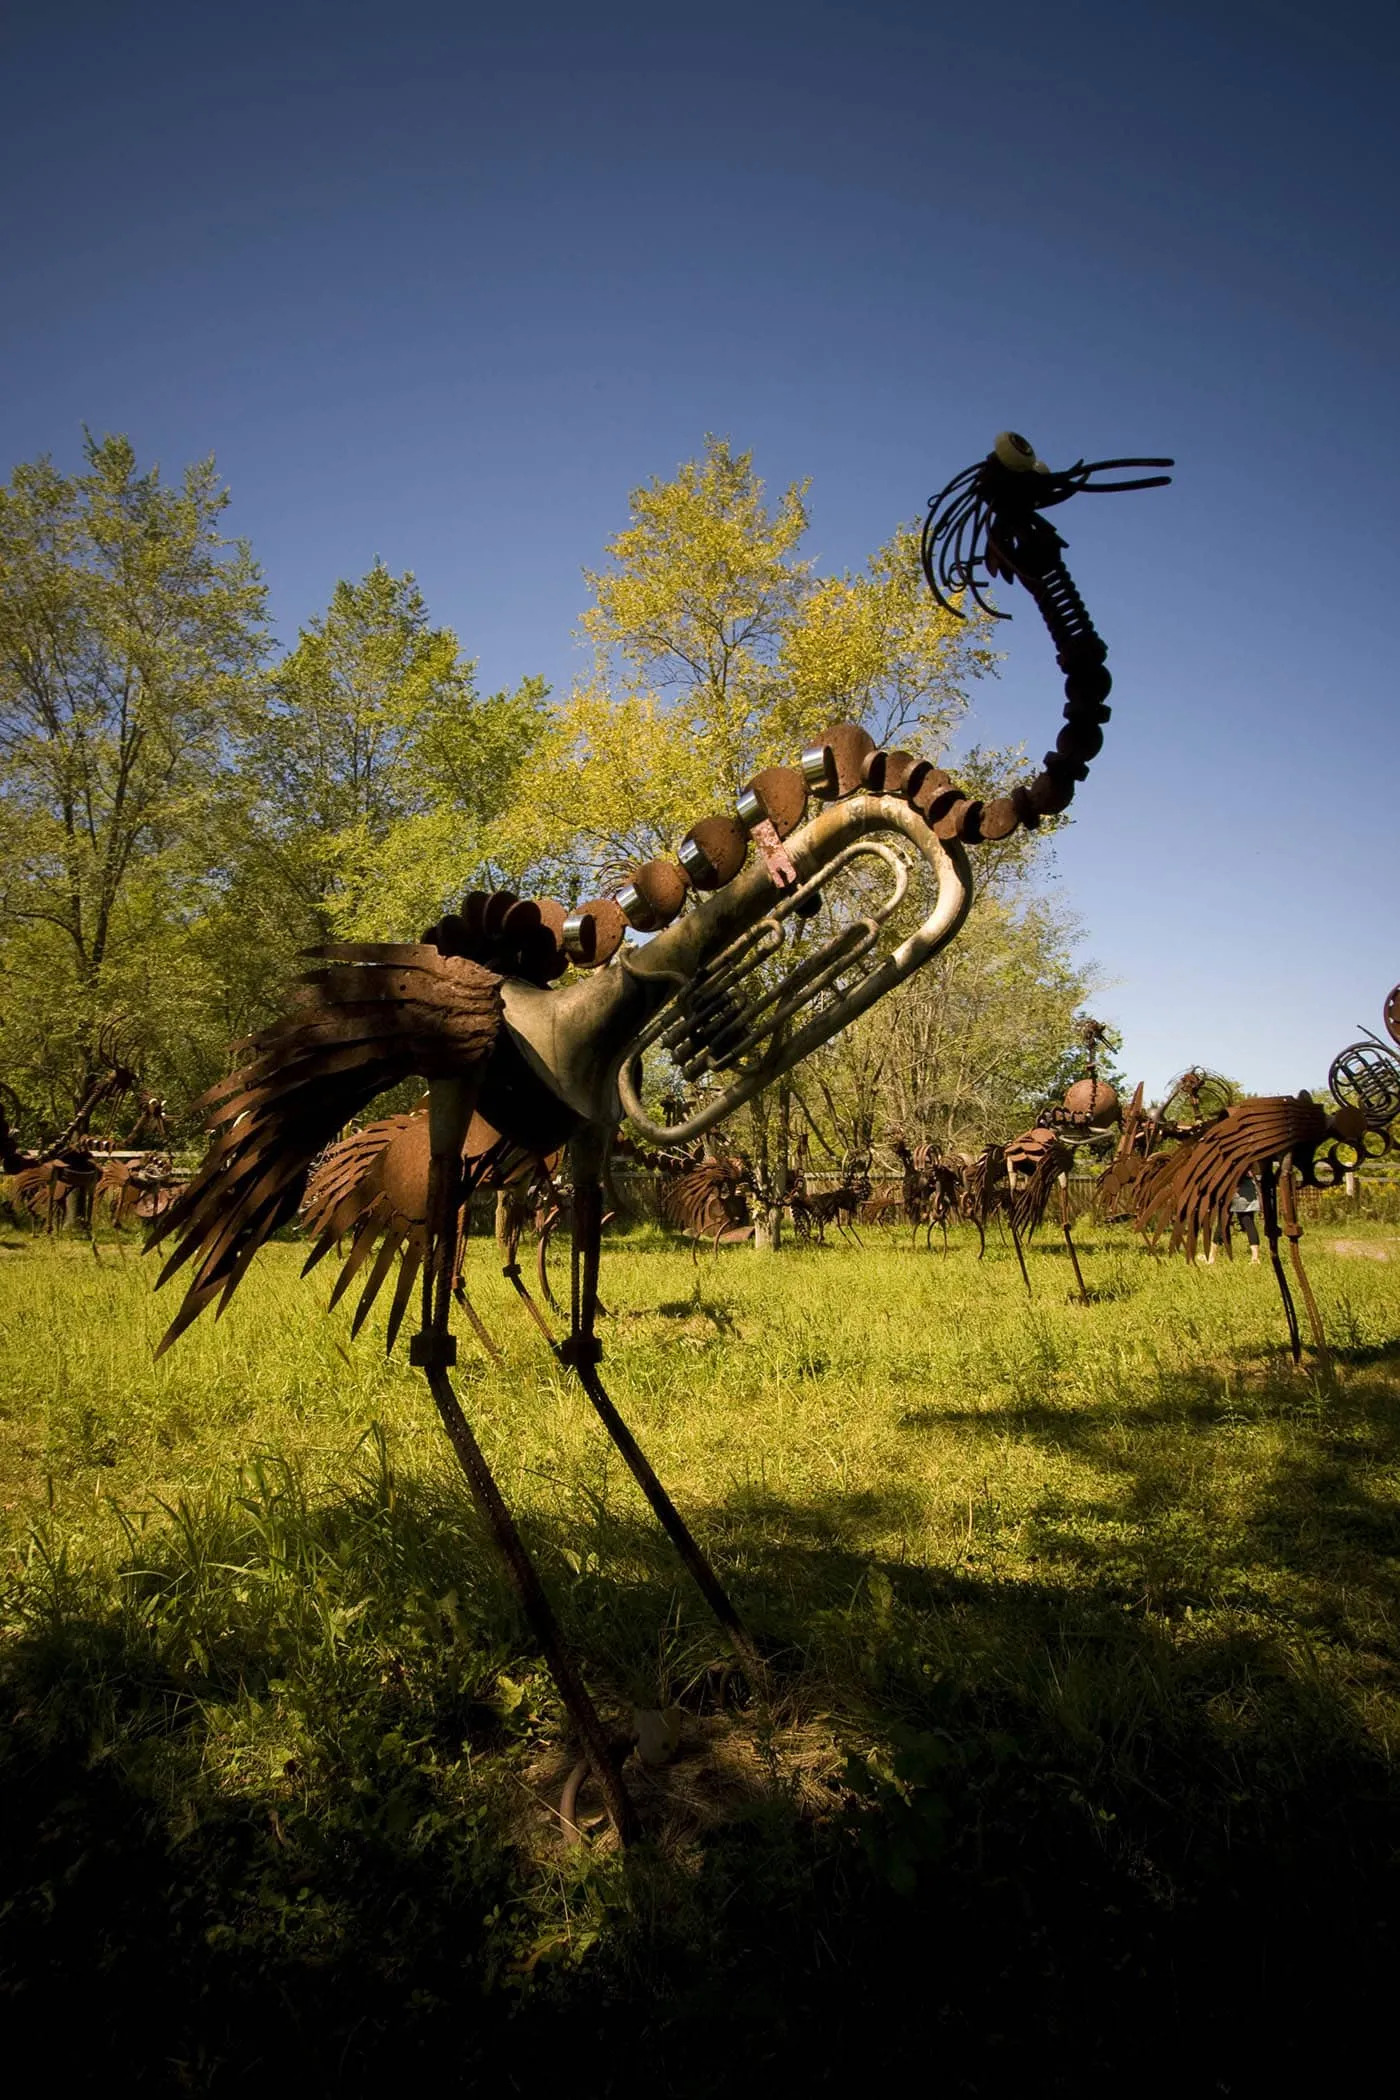 Scrap metal bird made from musical instruments. The world's largest scrap metal sculpture, Dr. Evermor's Forevertron at Delaney's Surplus Sales in Sumpter, Wisconsin, is meant for intergalactic travel. Visit this weird roadside attraction on a Wisconsin road trip.